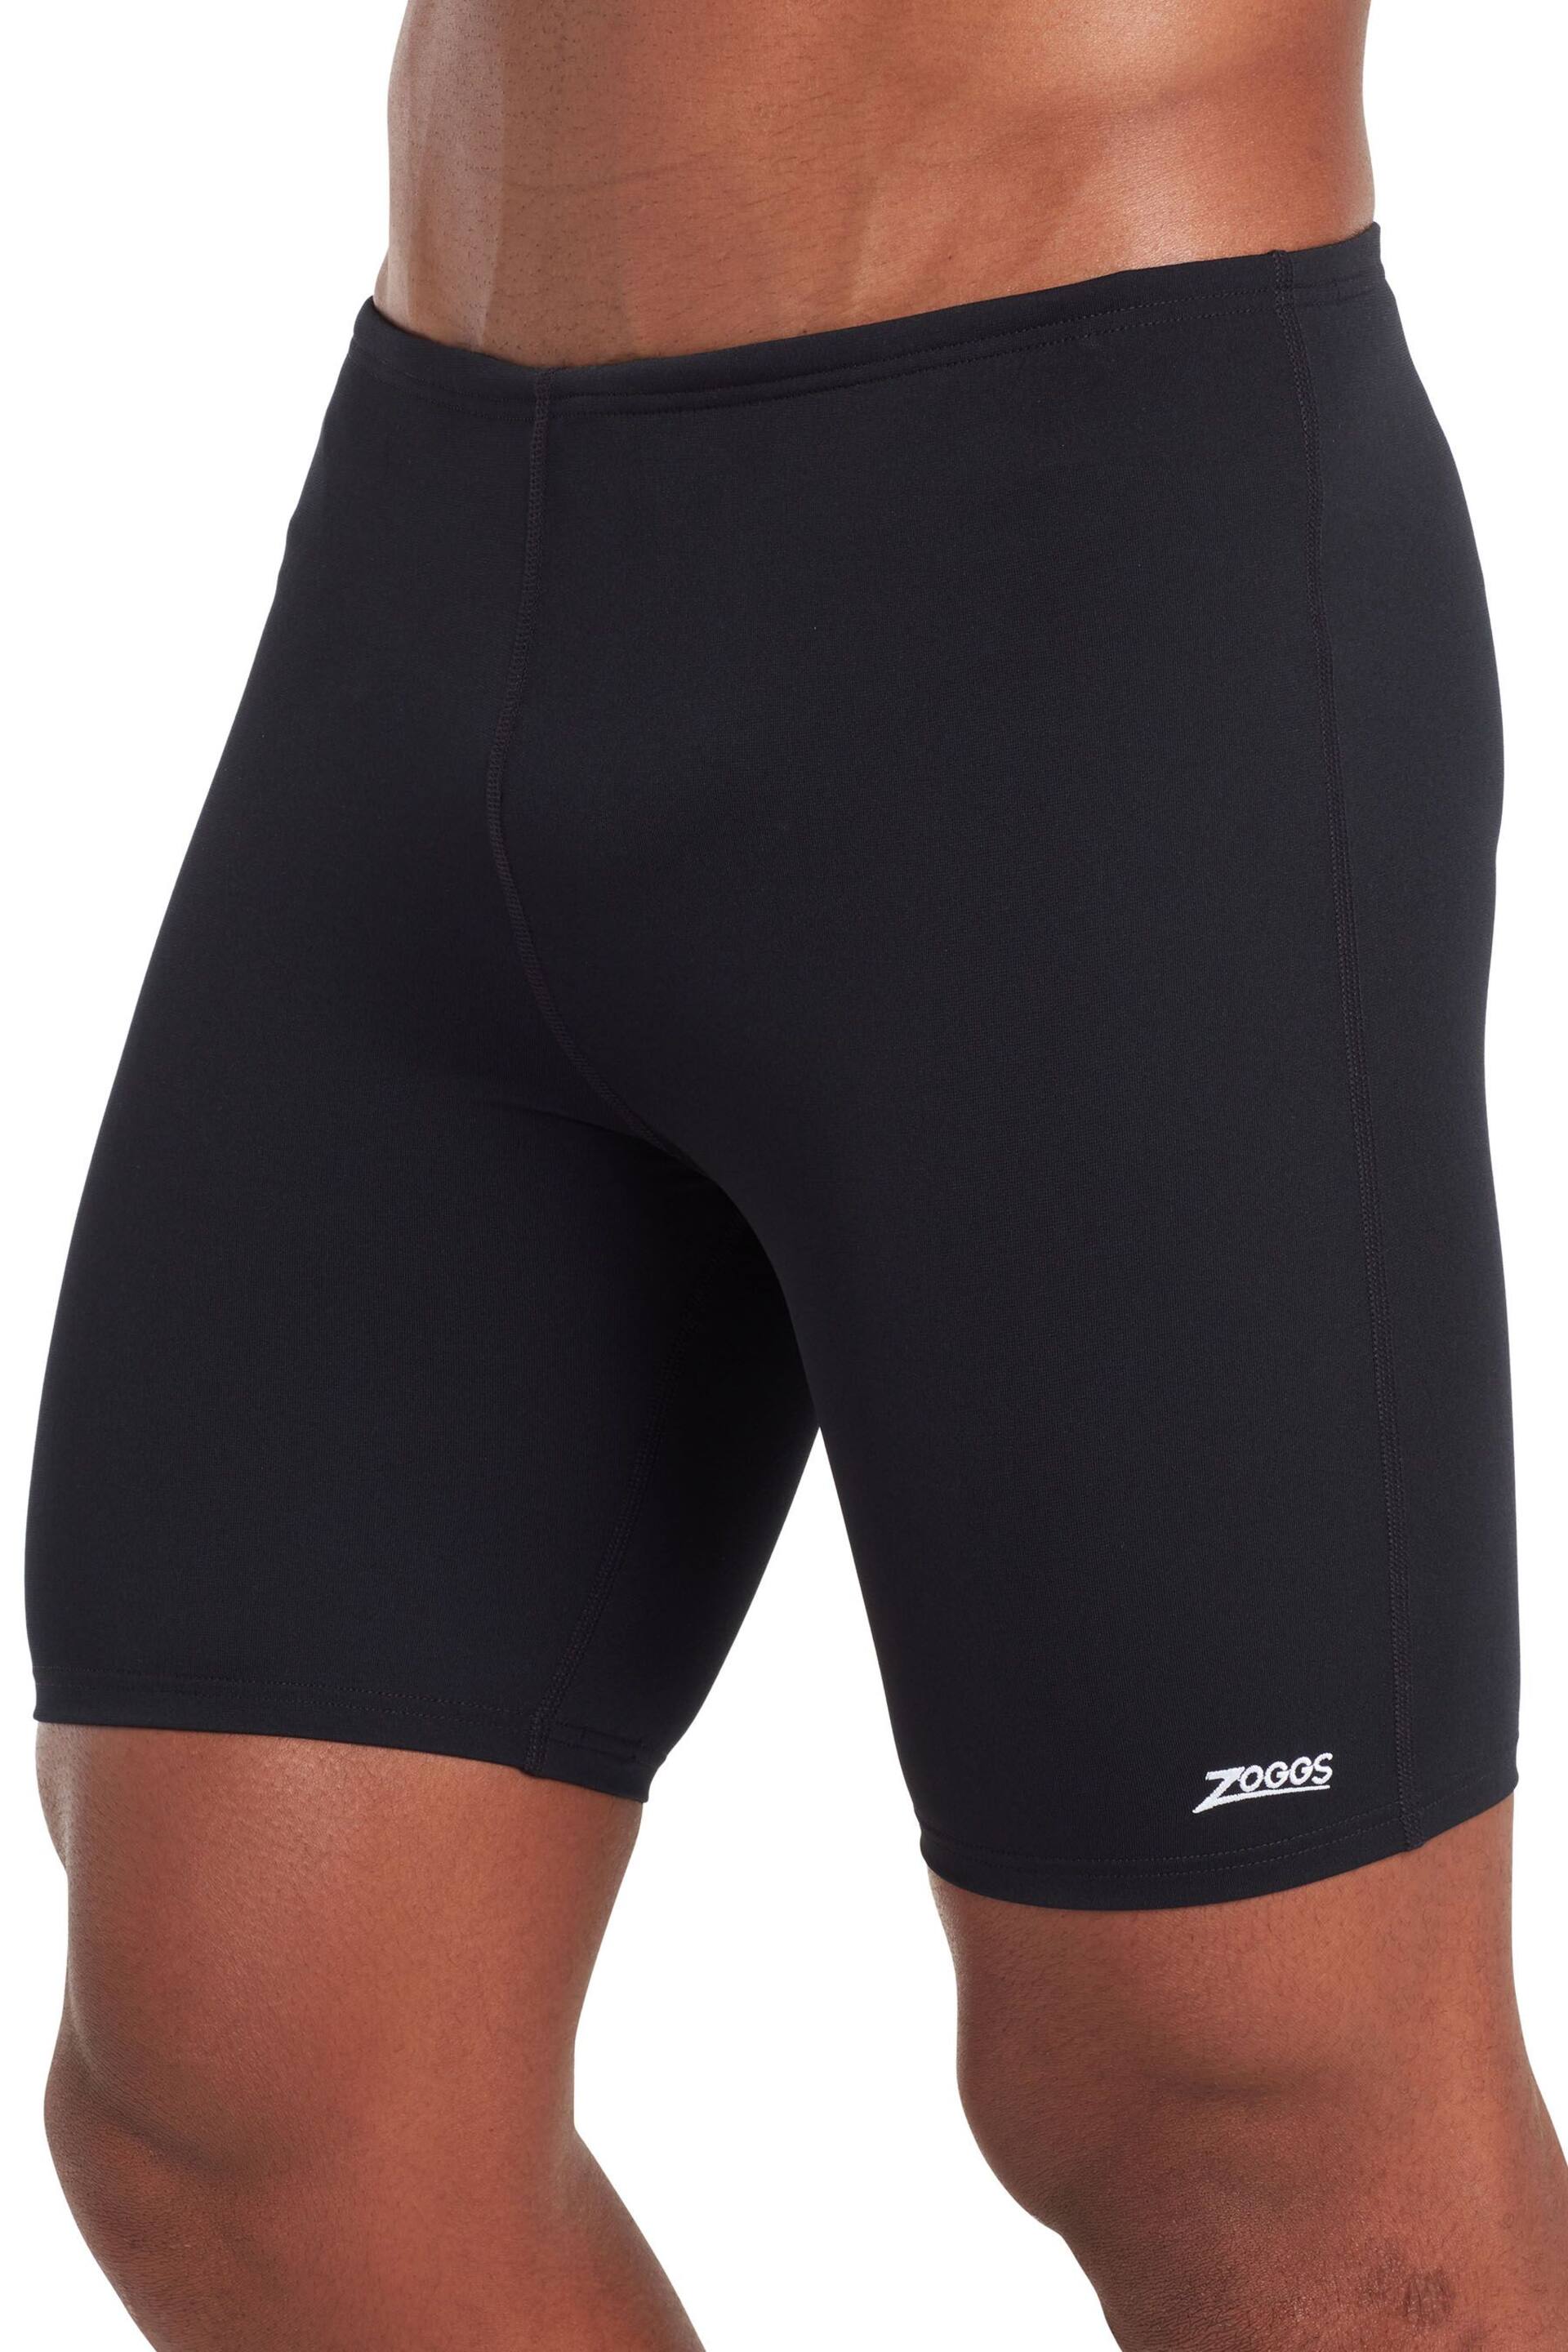 Zoggs Cottelsoe Ecolast Mid Jammer Shorts - Image 1 of 5